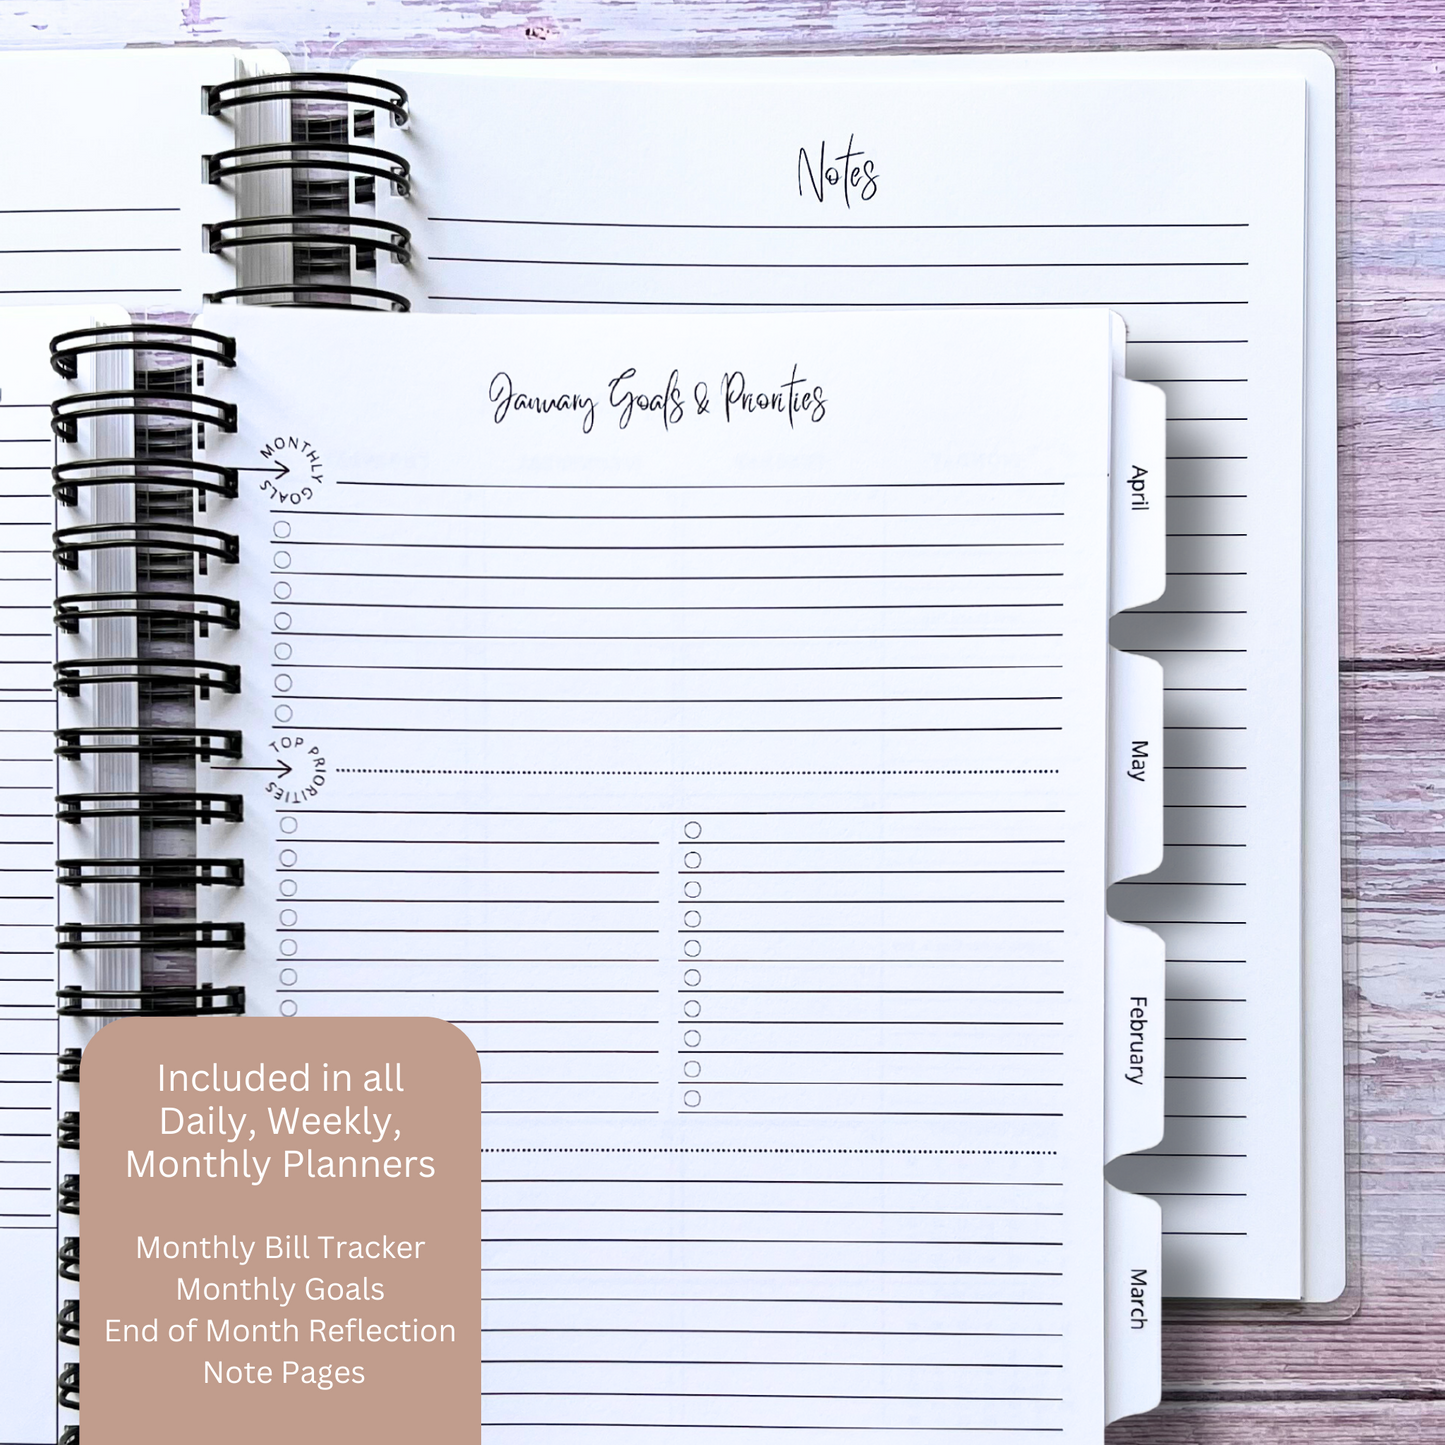 Personalized Weekly Planner | She Blooms